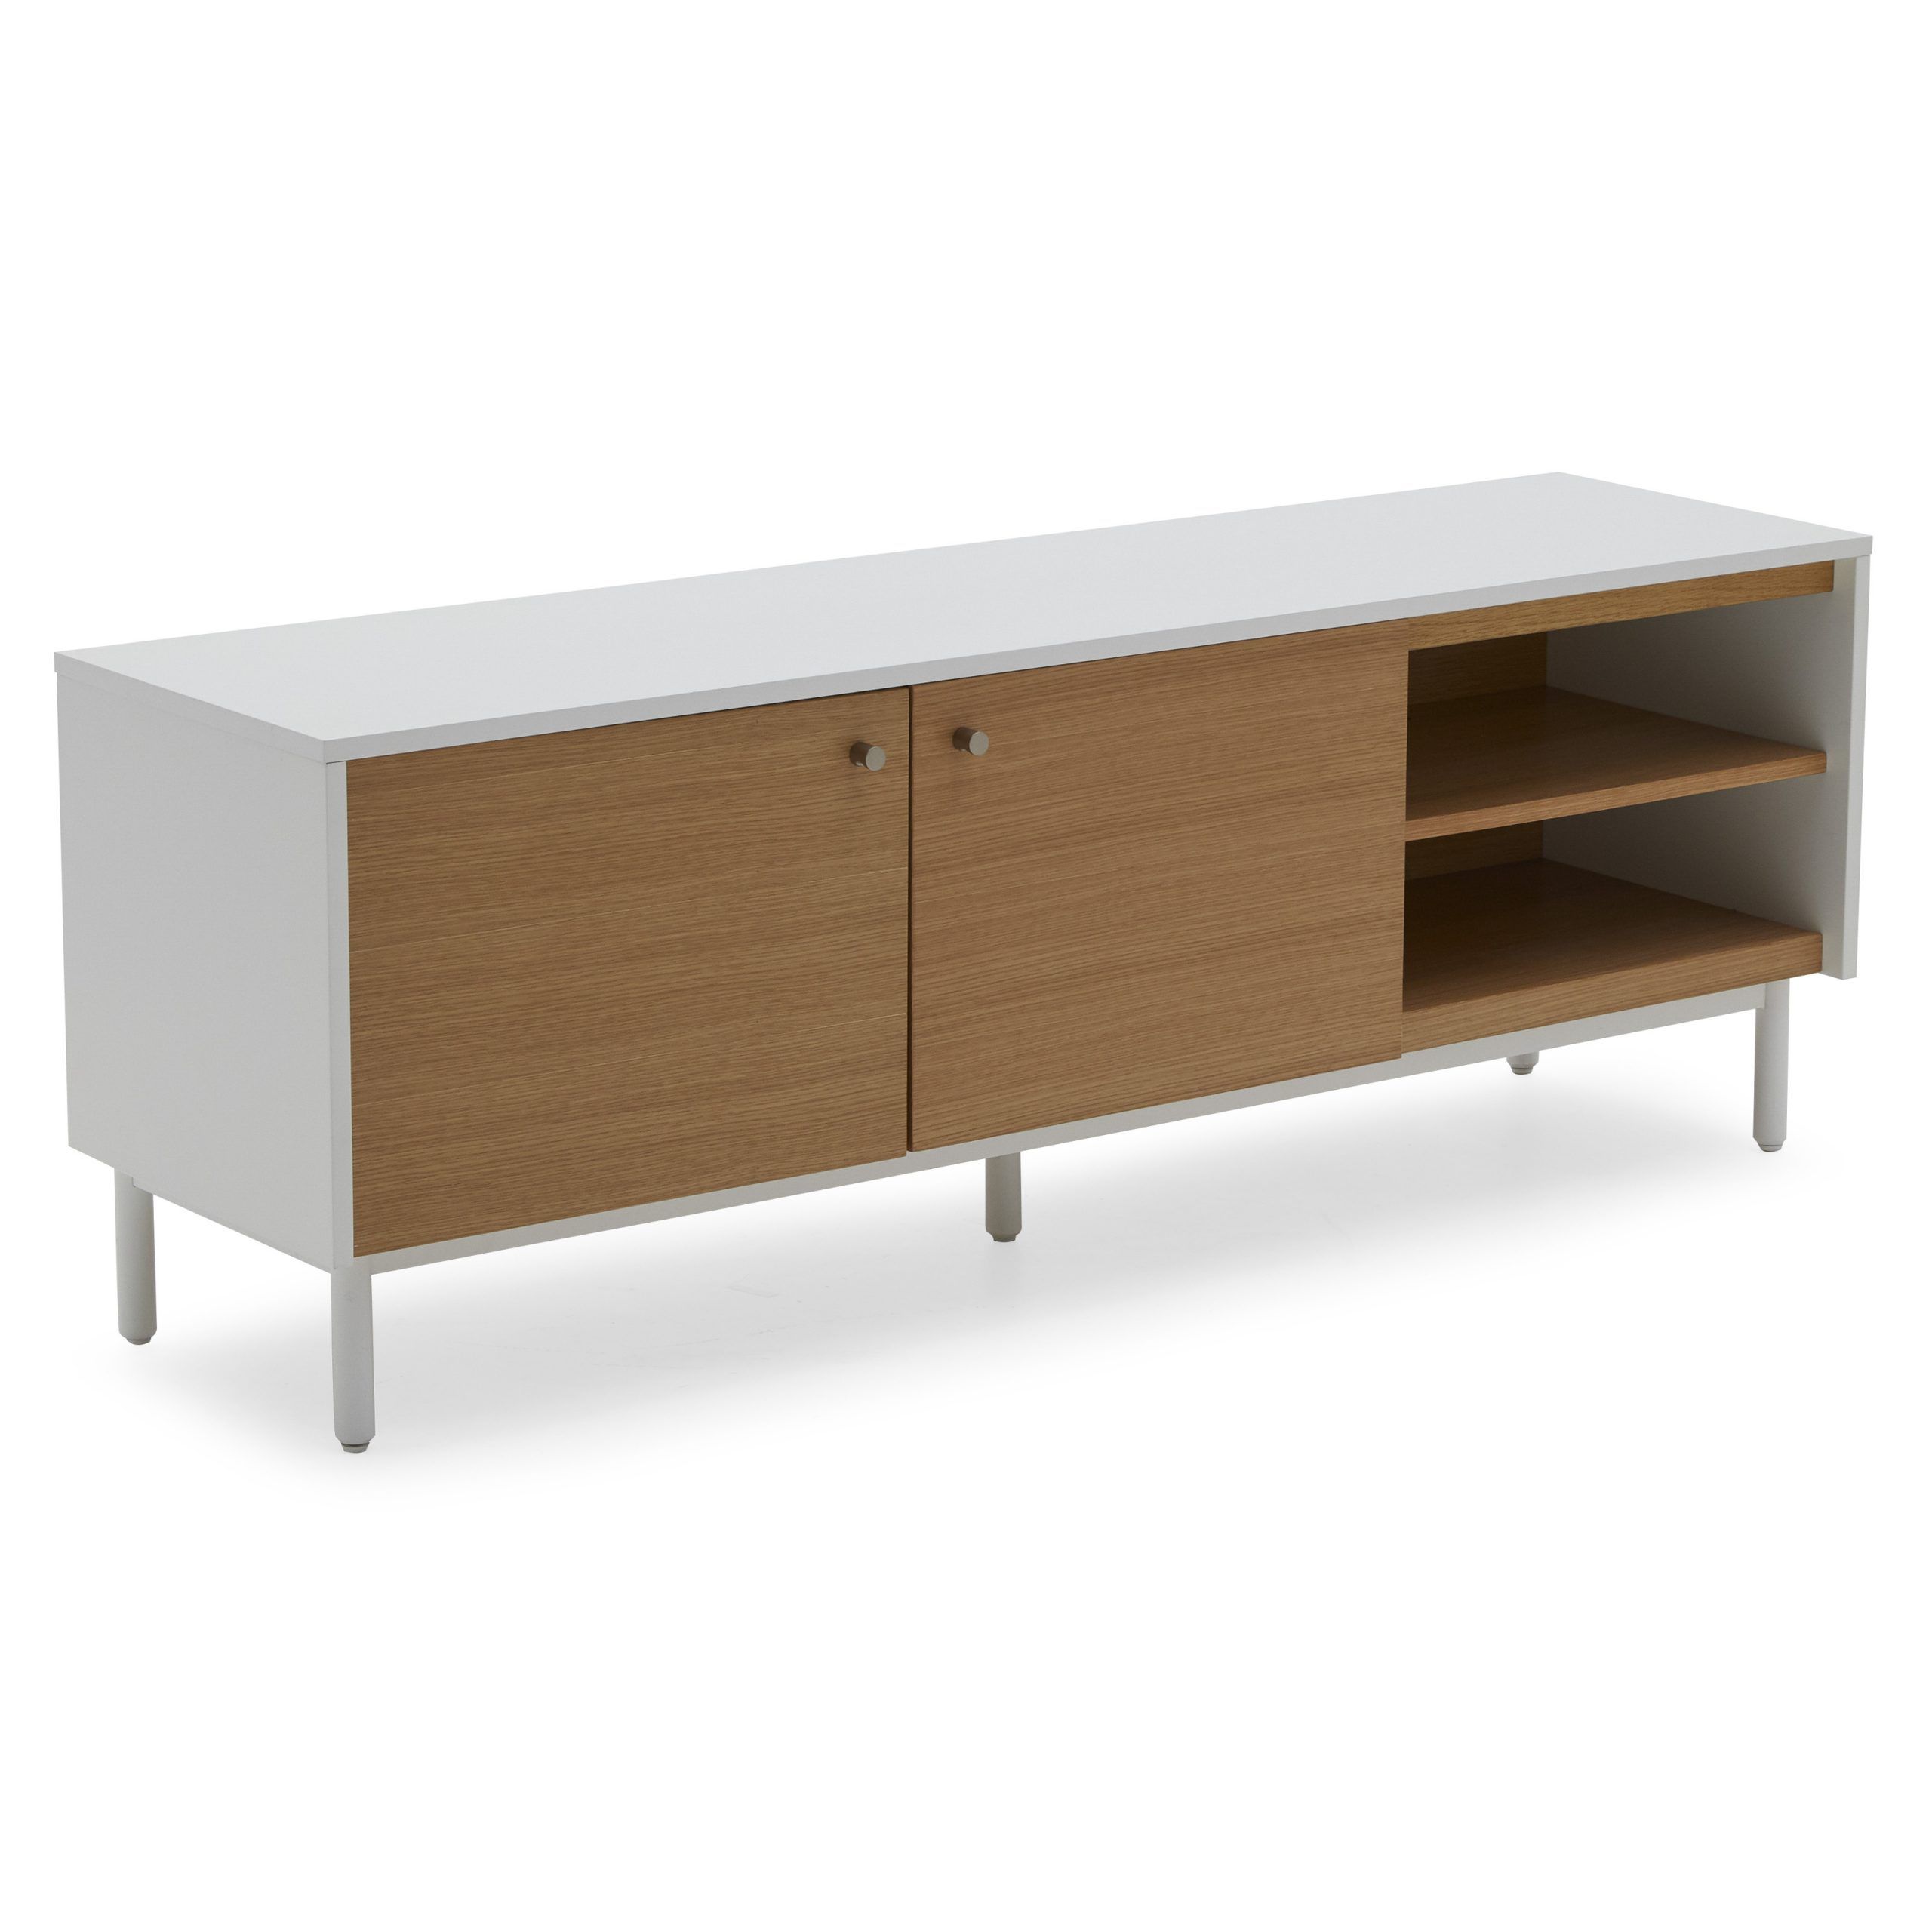 Scandinavian Finna Low Profile Tv Stand For Tvs Up To 60 In Scandinavian Design Tv Cabinets (View 3 of 15)